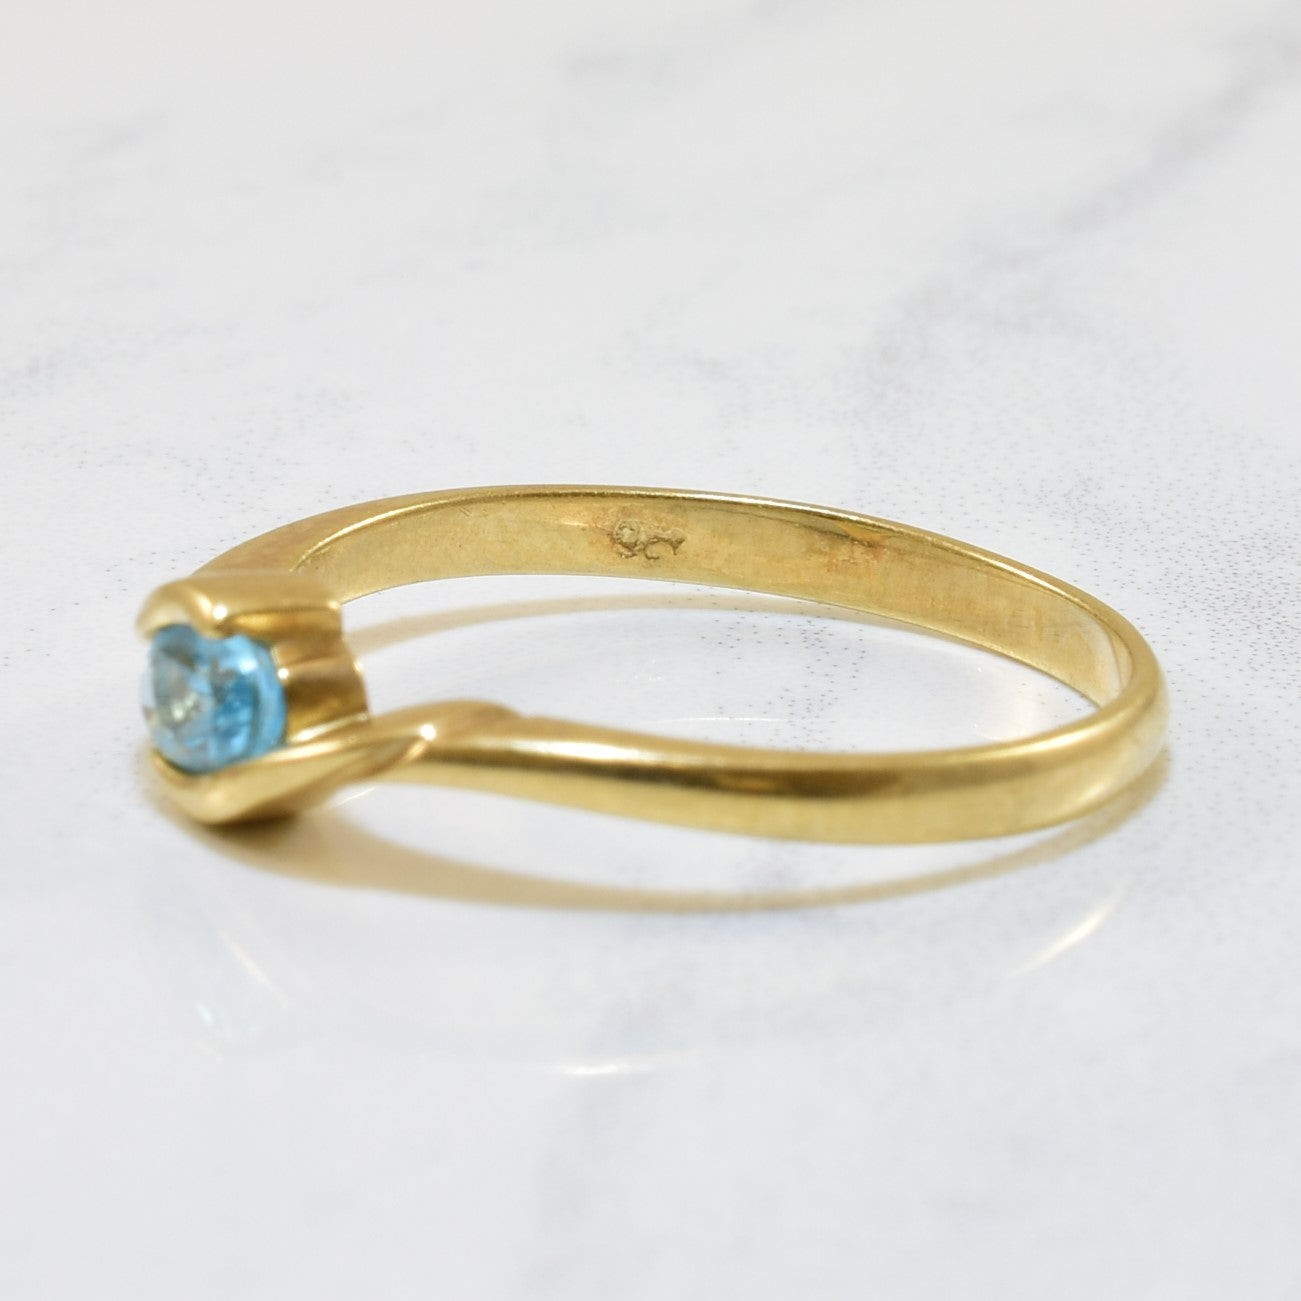 Oval Blue Topaz Solitaire Ring | 0.22ct | SZ 7.5 |